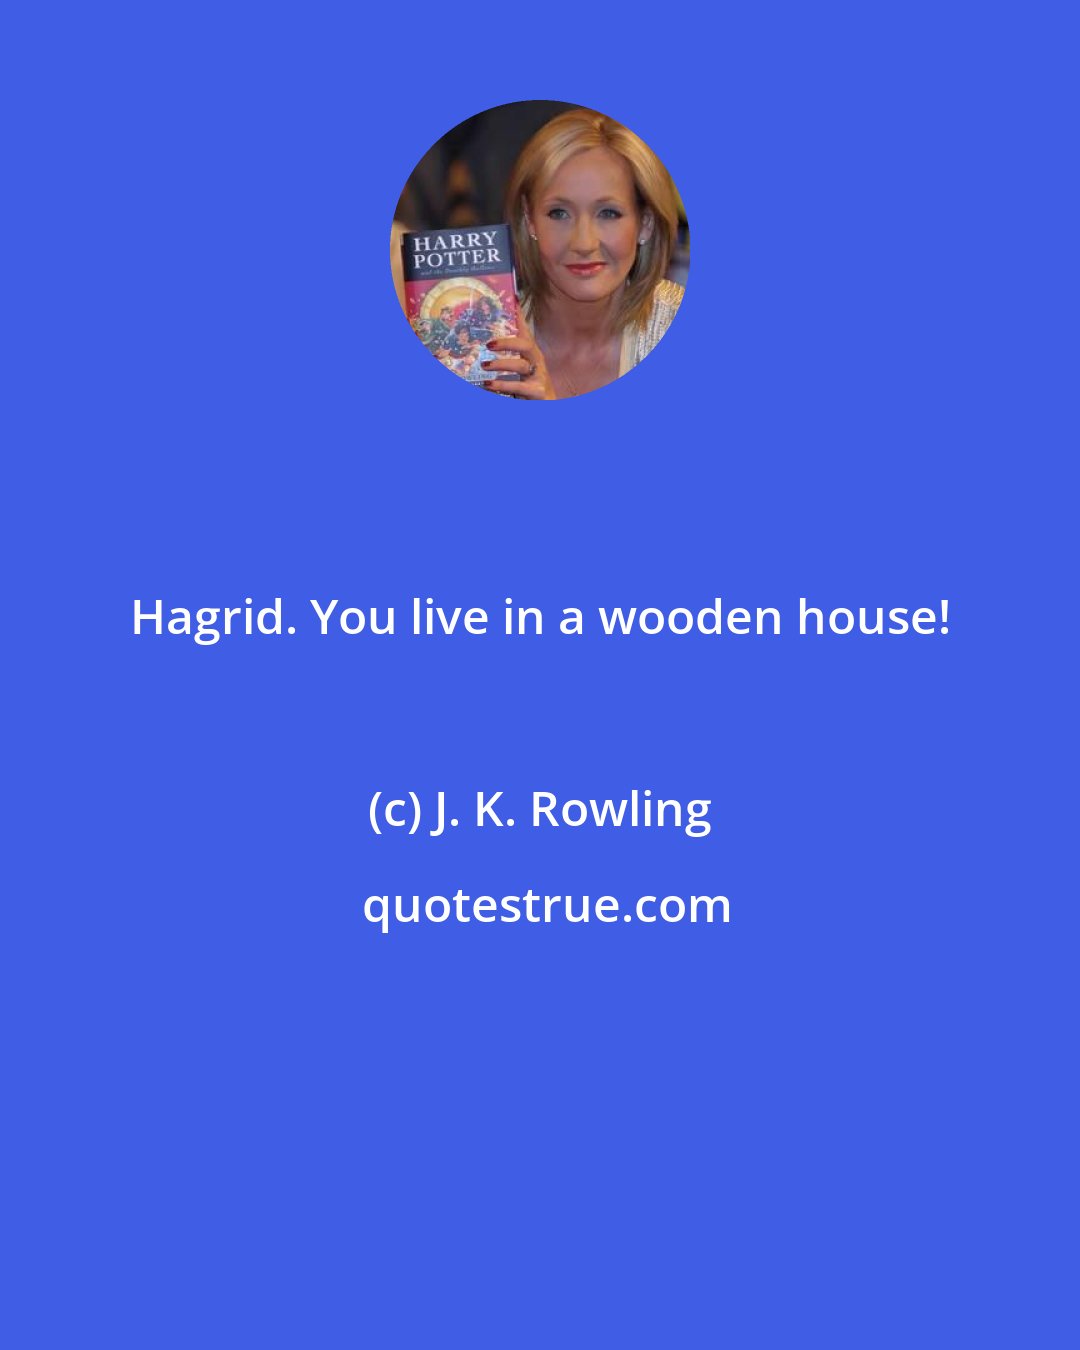 J. K. Rowling: Hagrid. You live in a wooden house!